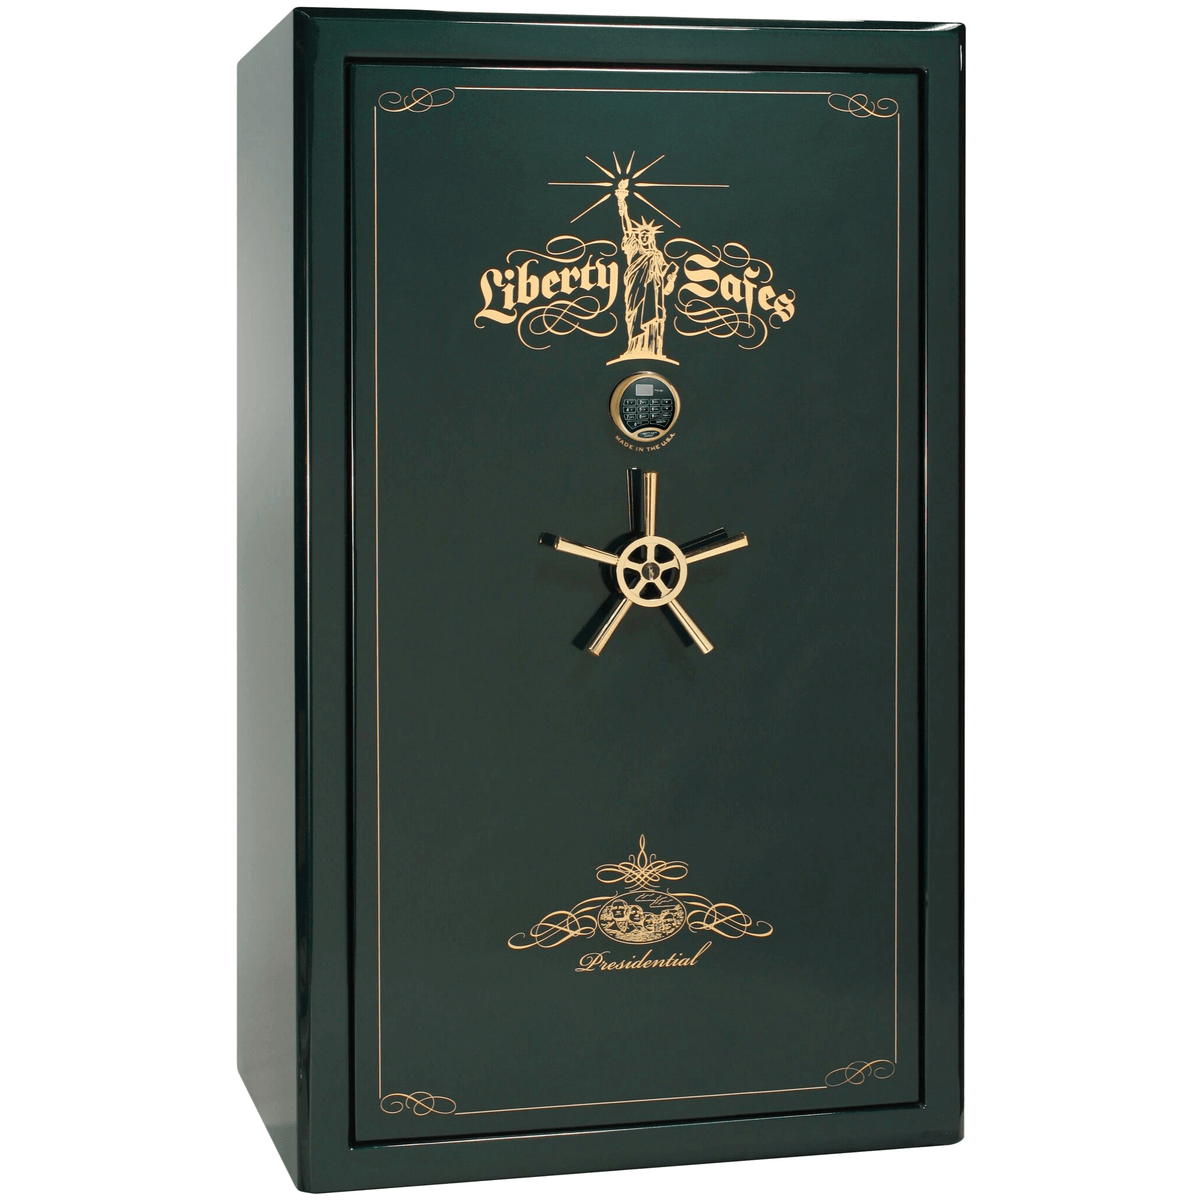 Liberty Safe Presidential 50 in Emerald Green with 24k Gold Electronic Lock, closed door.